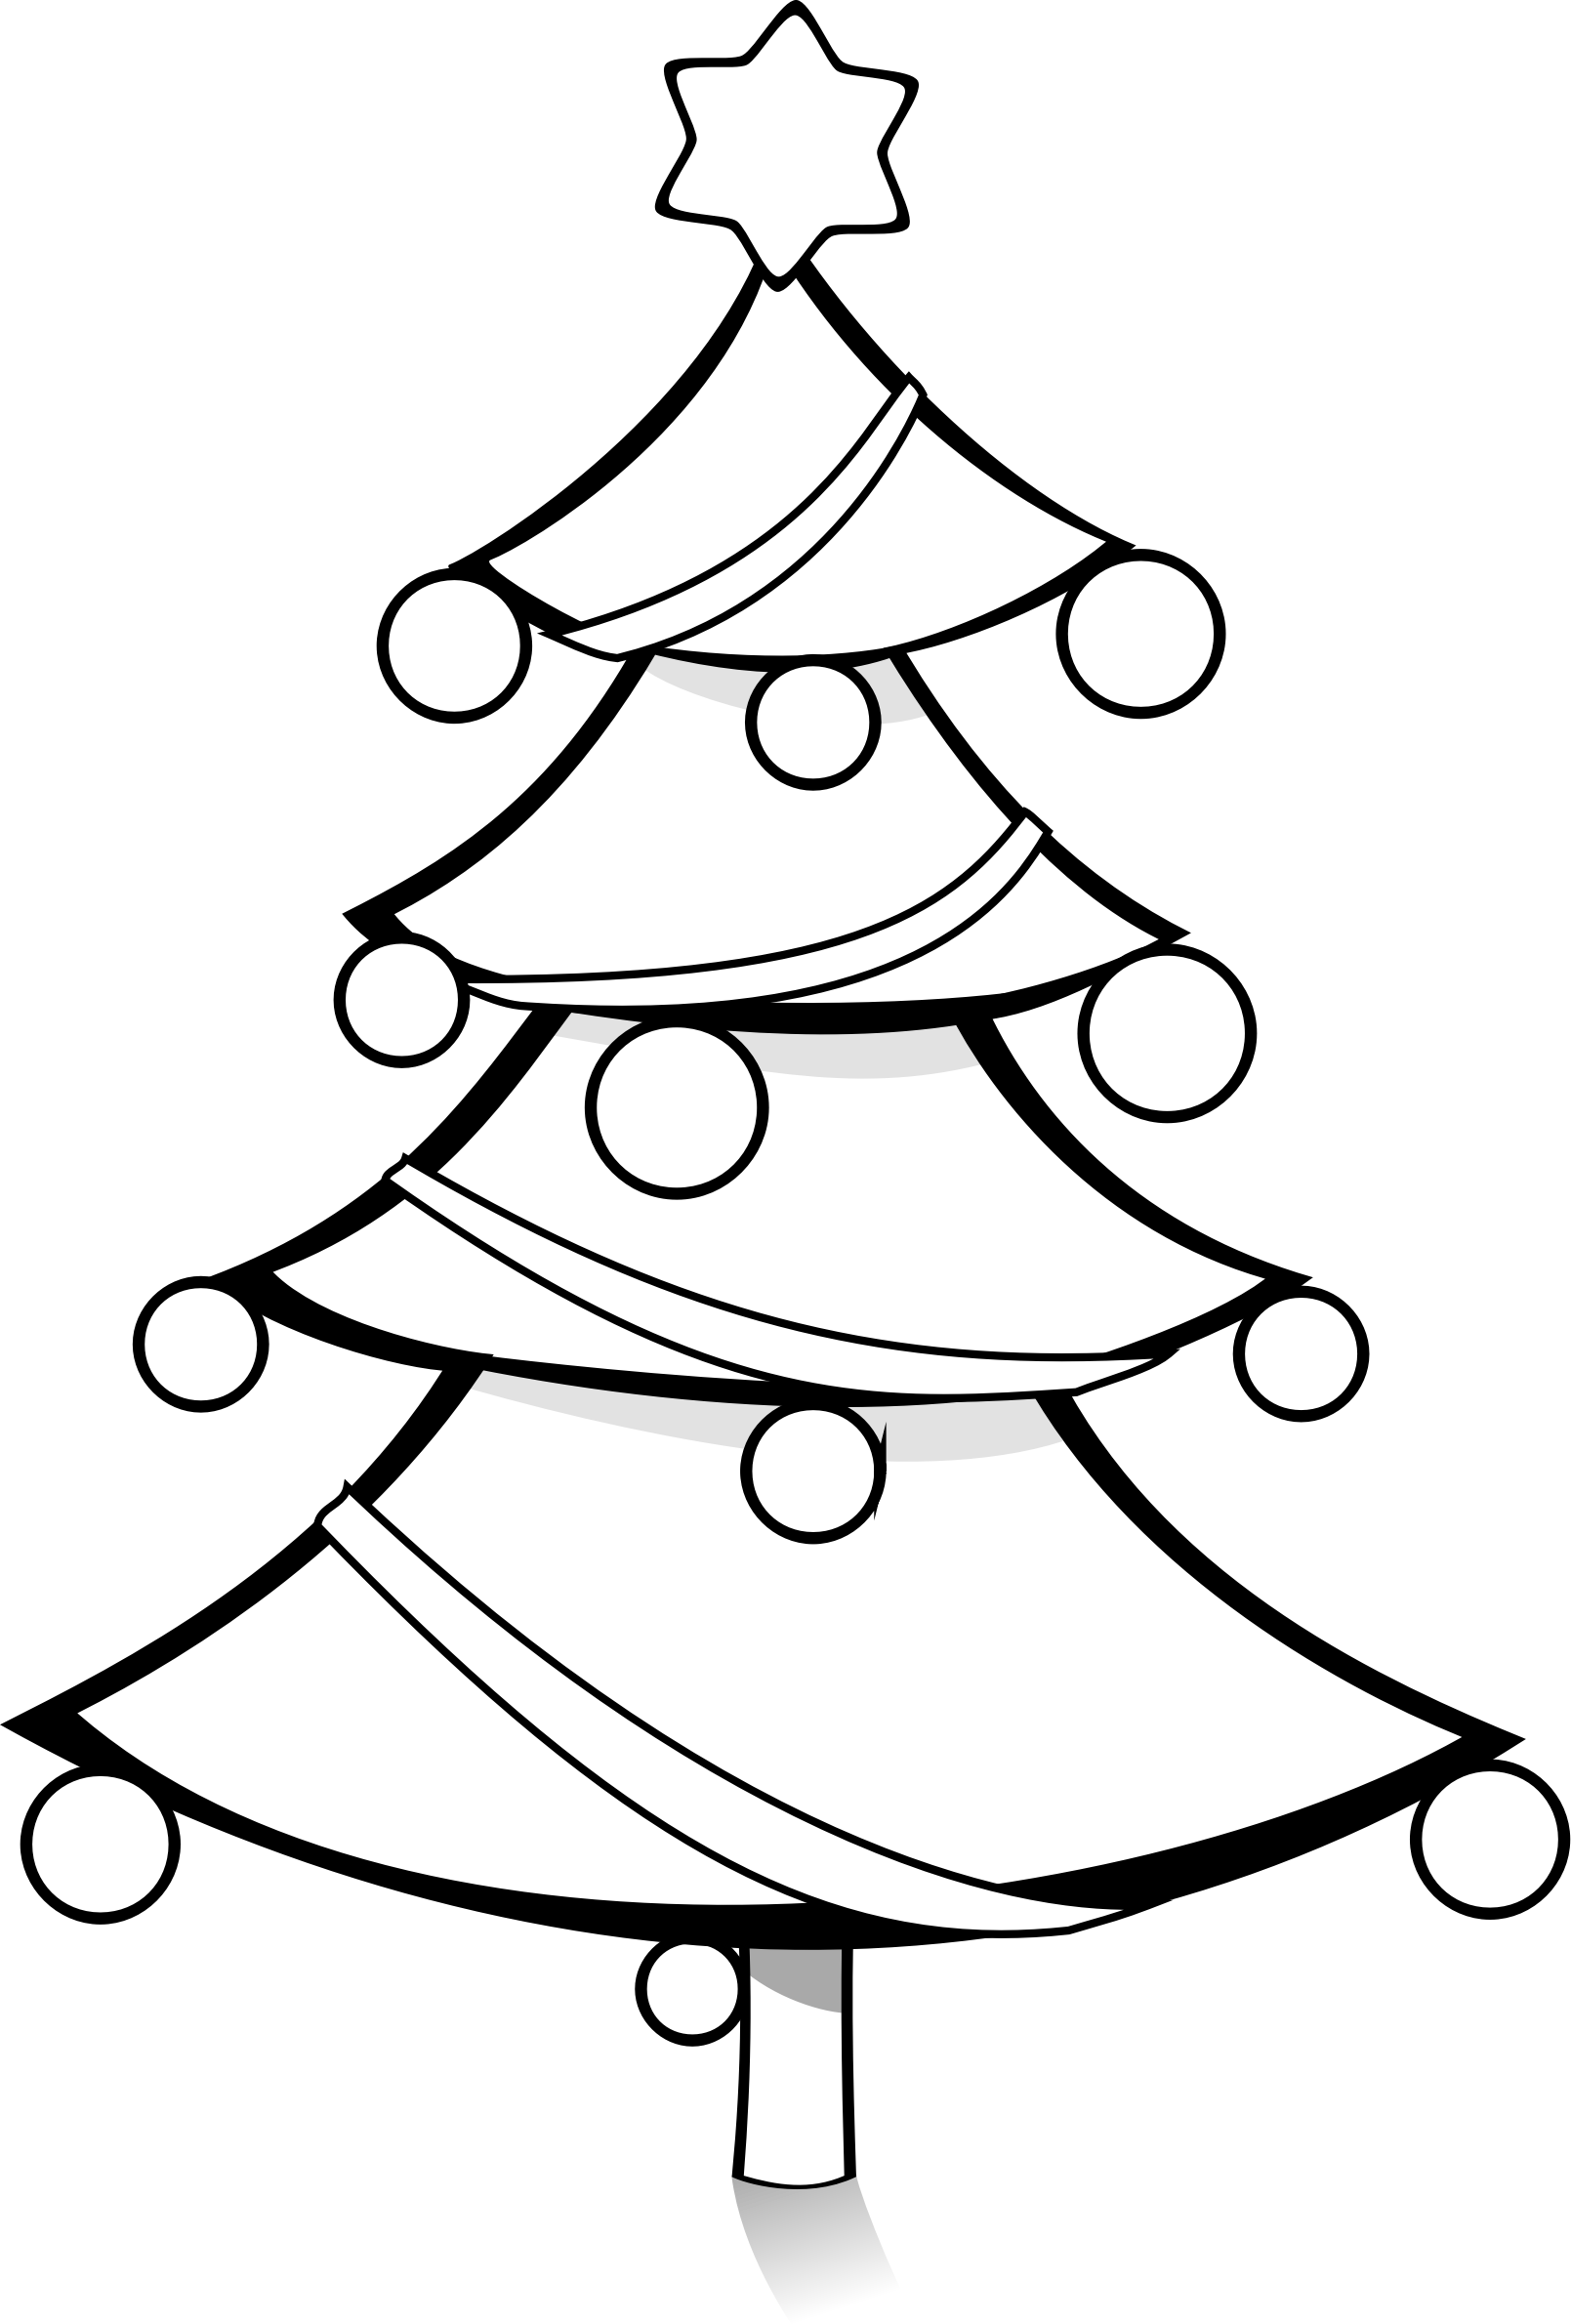 Black And White Christmas Tree Clipart  ClipArt Best